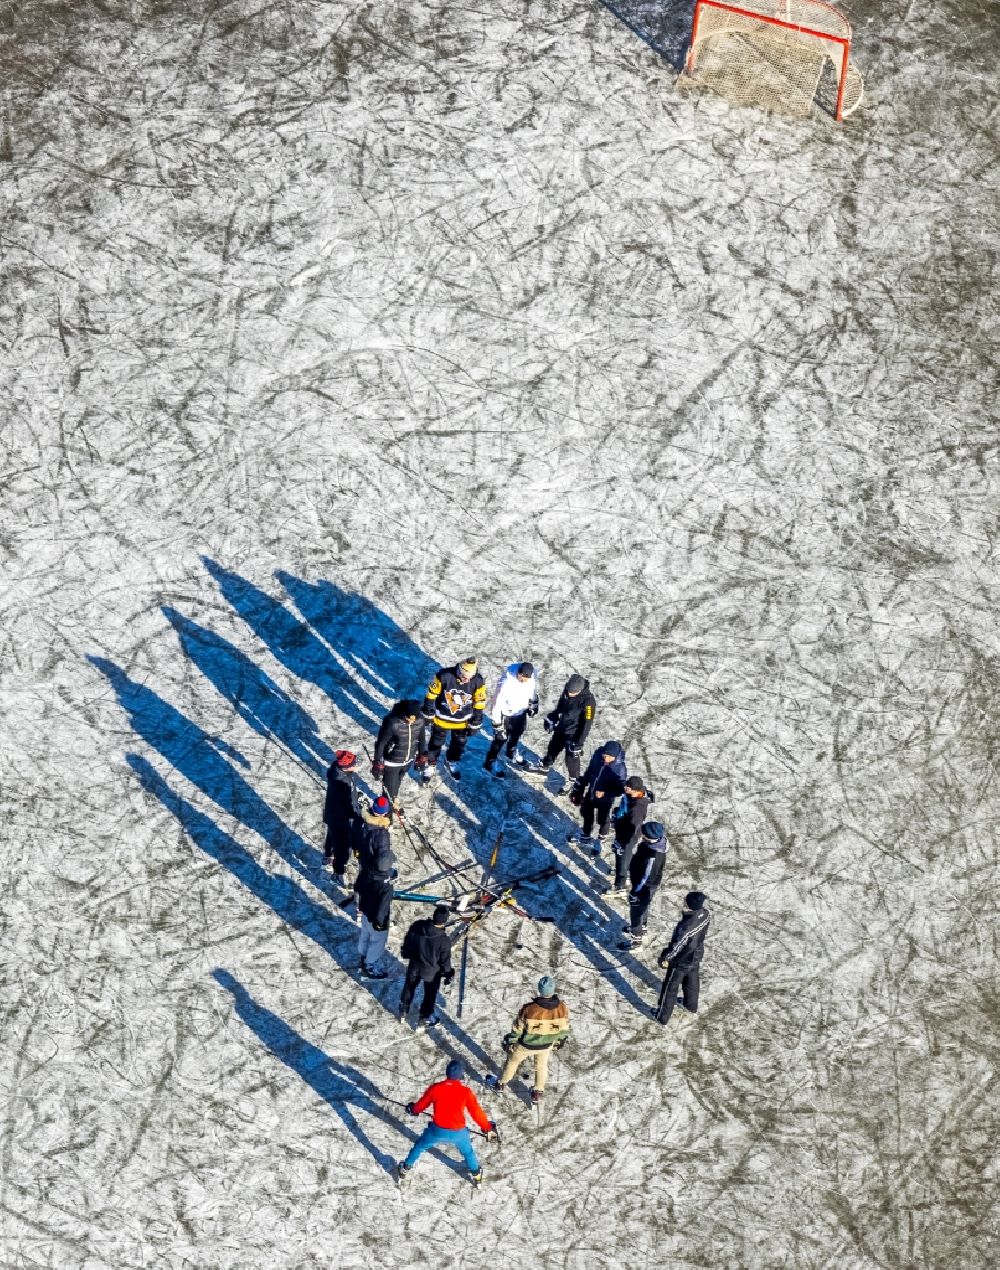 Aerial image Duisburg - Walkers and passers-by walk on the ice sheet of the frozen bank areas in the course of the river of the Rhine river in the district Ehingen in Duisburg at Ruhrgebiet in the state North Rhine-Westphalia, Germany